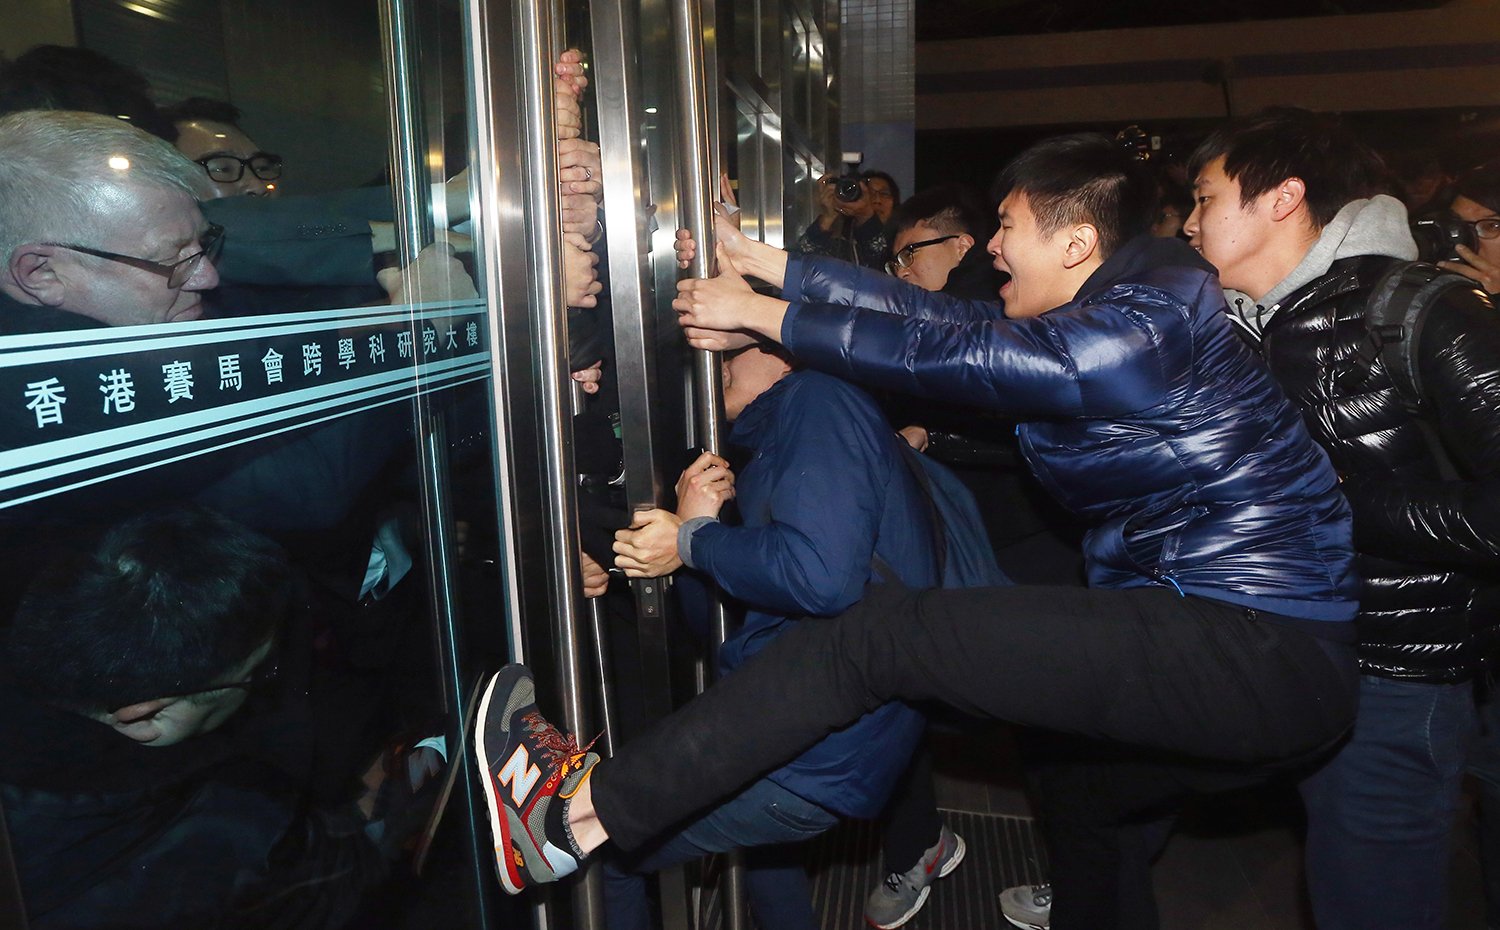 HKU students try to break into the The Hong Kong Jockey Club Buildingg For Interdisciplinary Research on Sassoon Road in Pok Fu Lam, where Chairman of the governing Council of the University of Hong Kong Arthur Li Kwok-cheung is. Li refused to talk to students. 26JAN16 SCMP/ Sam Tsang